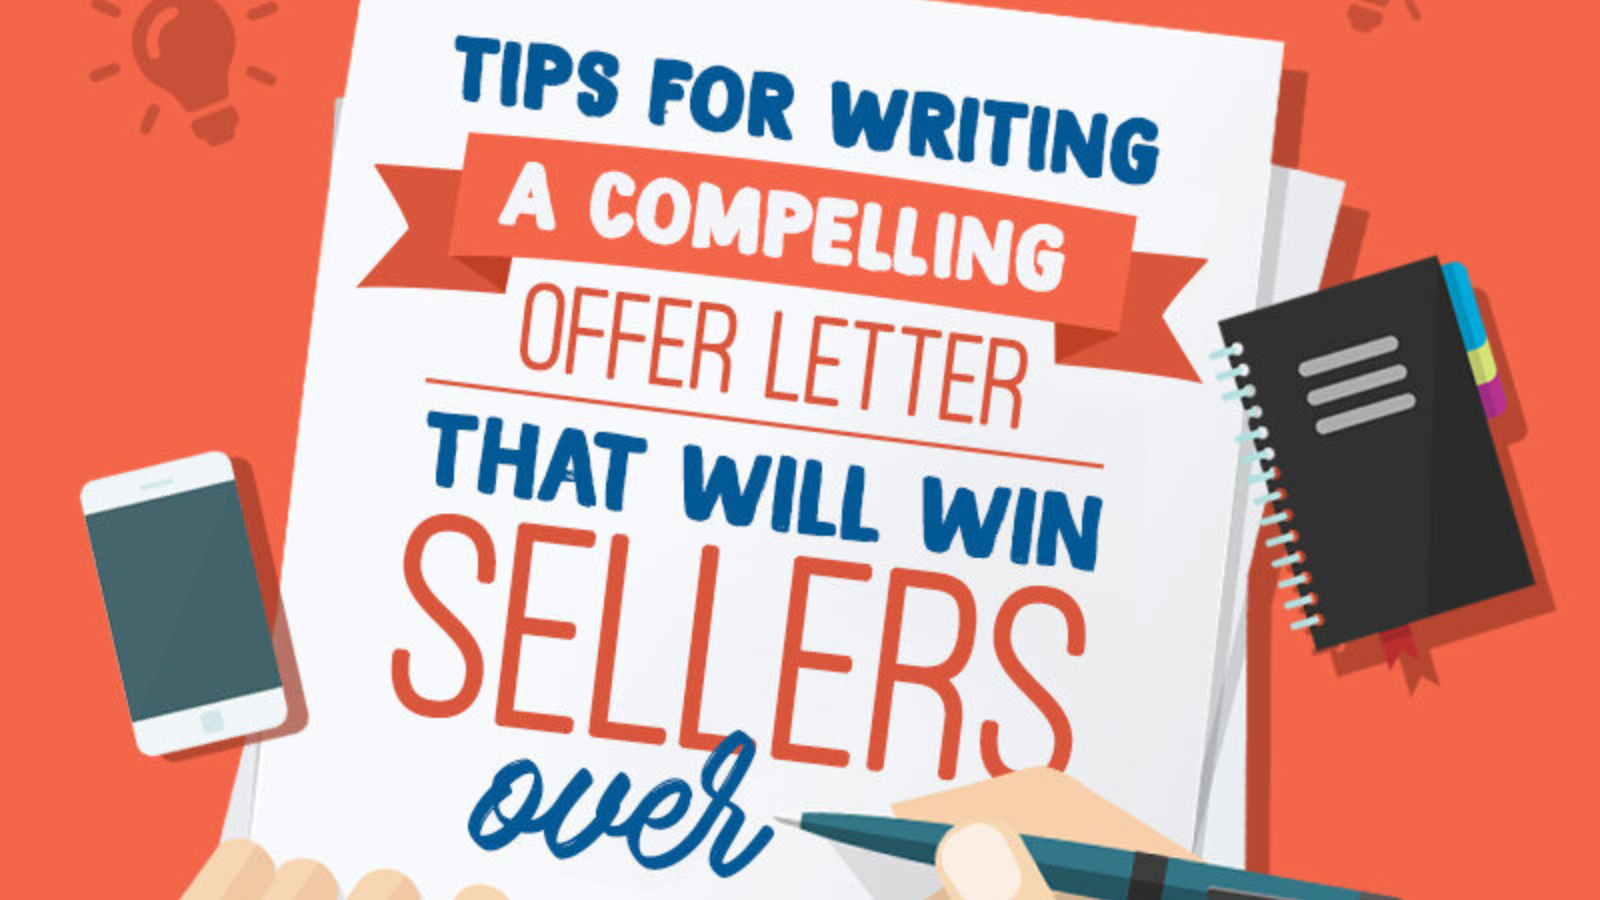 12 Tips For Writing A Compelling Offer Letter That Will Win Sellers Over